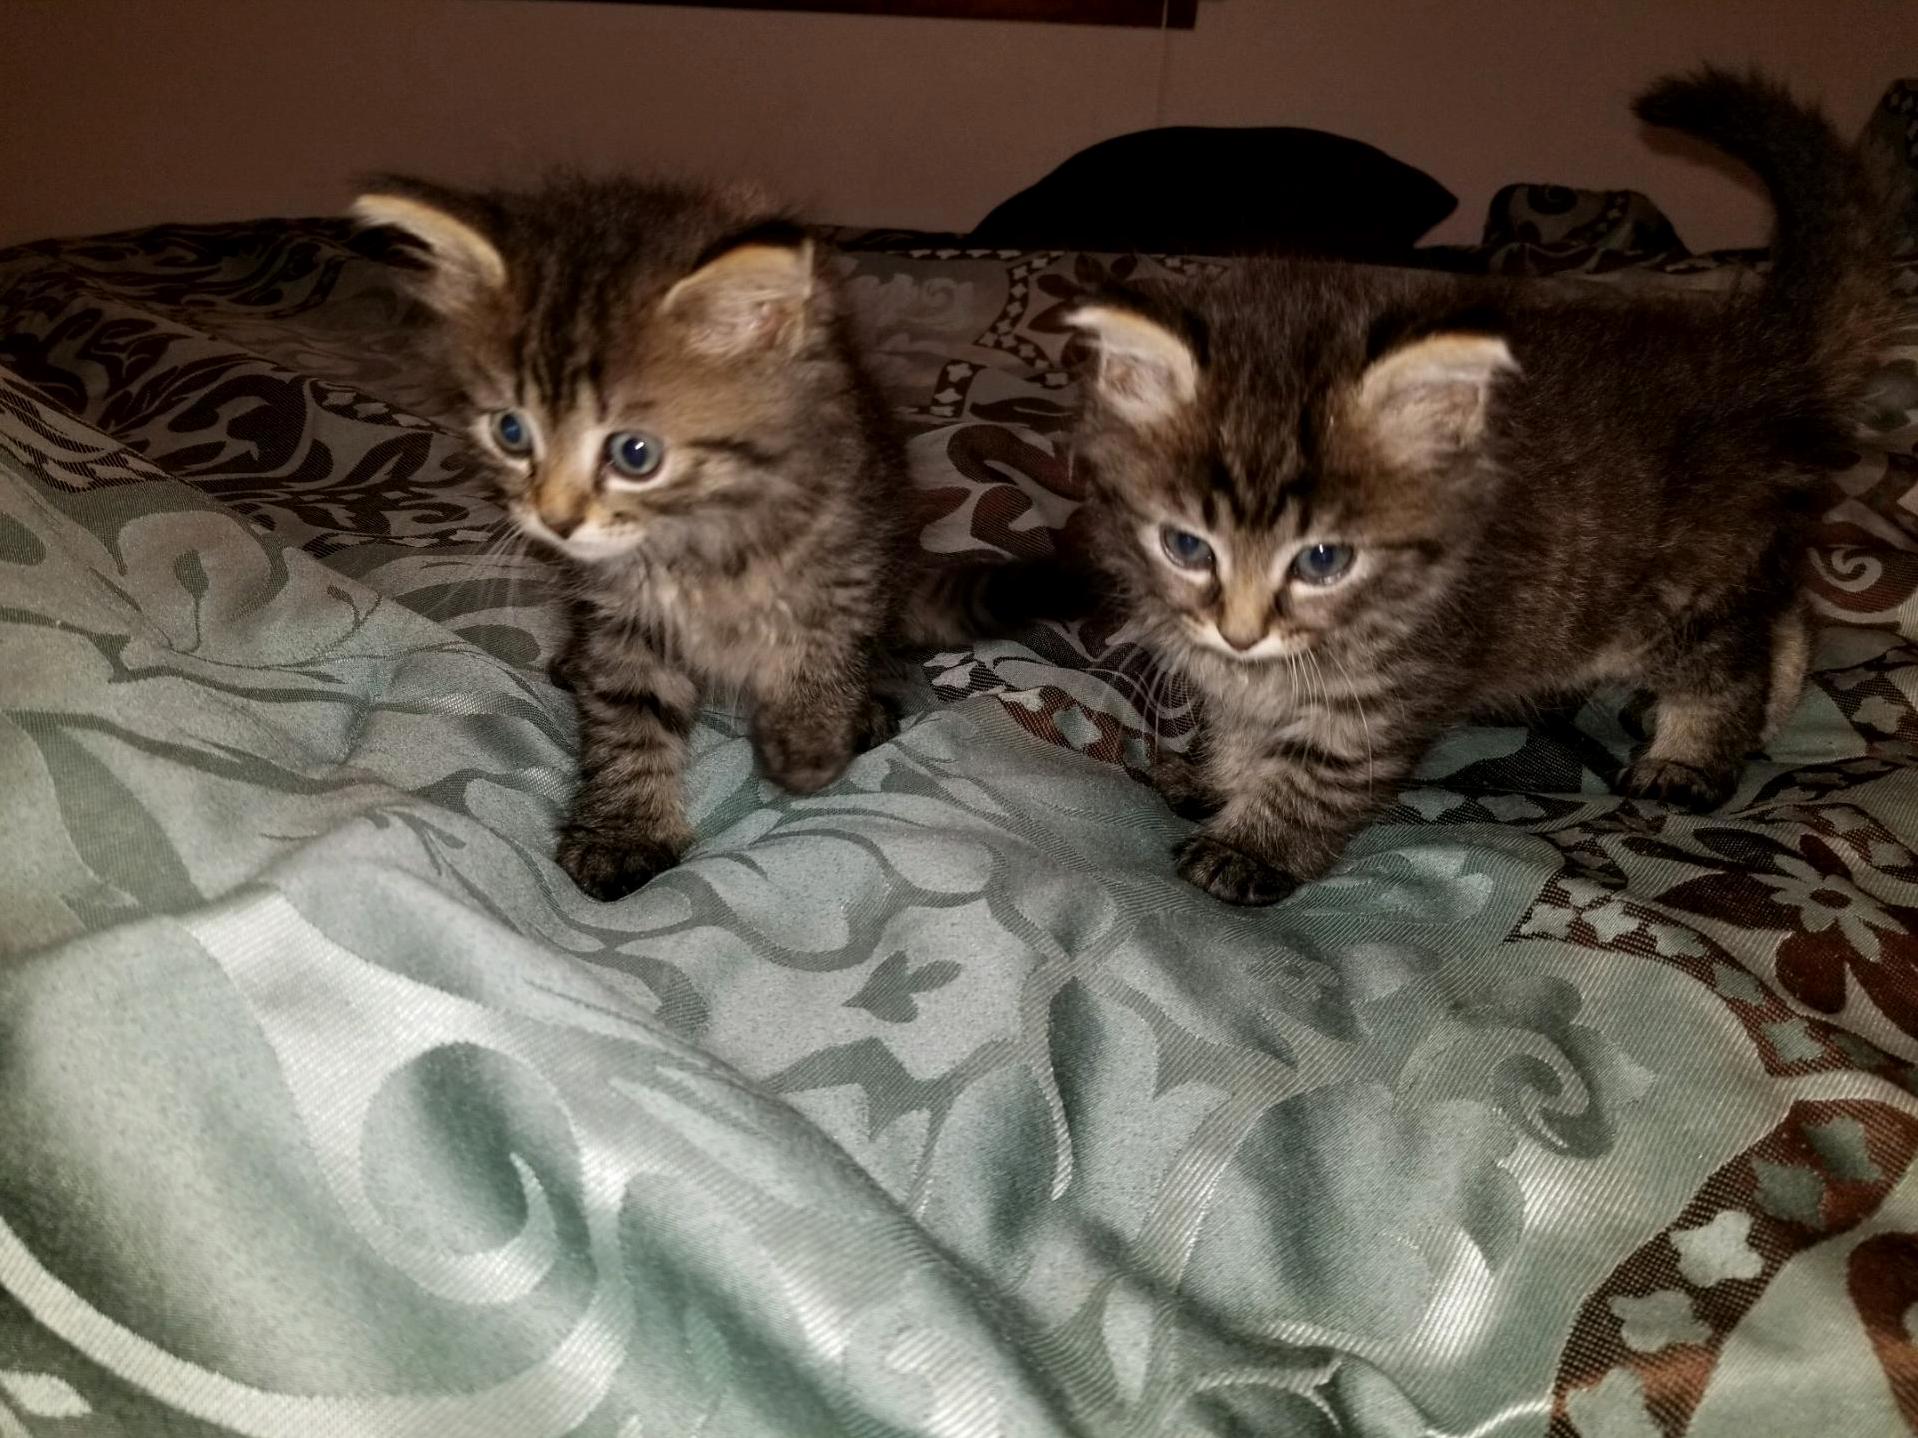 Need name suggestions for 2 new members of the family